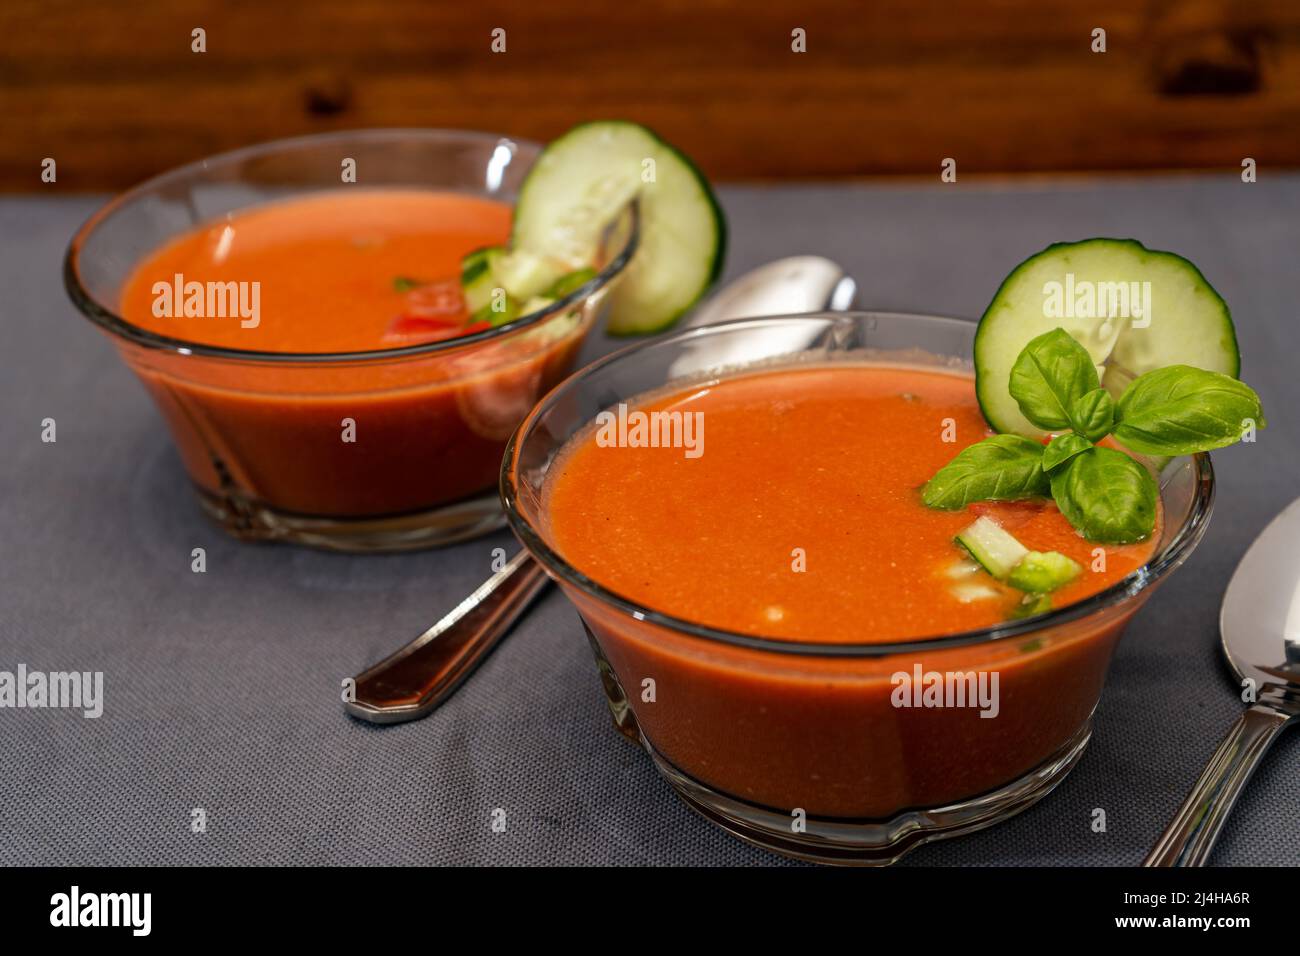 Hig view of tow Transparent glass bowls with Gaspacho Andaluz. A vegetable and organic soup or cold drink that is drunk in summer or hot days. Stock Photo